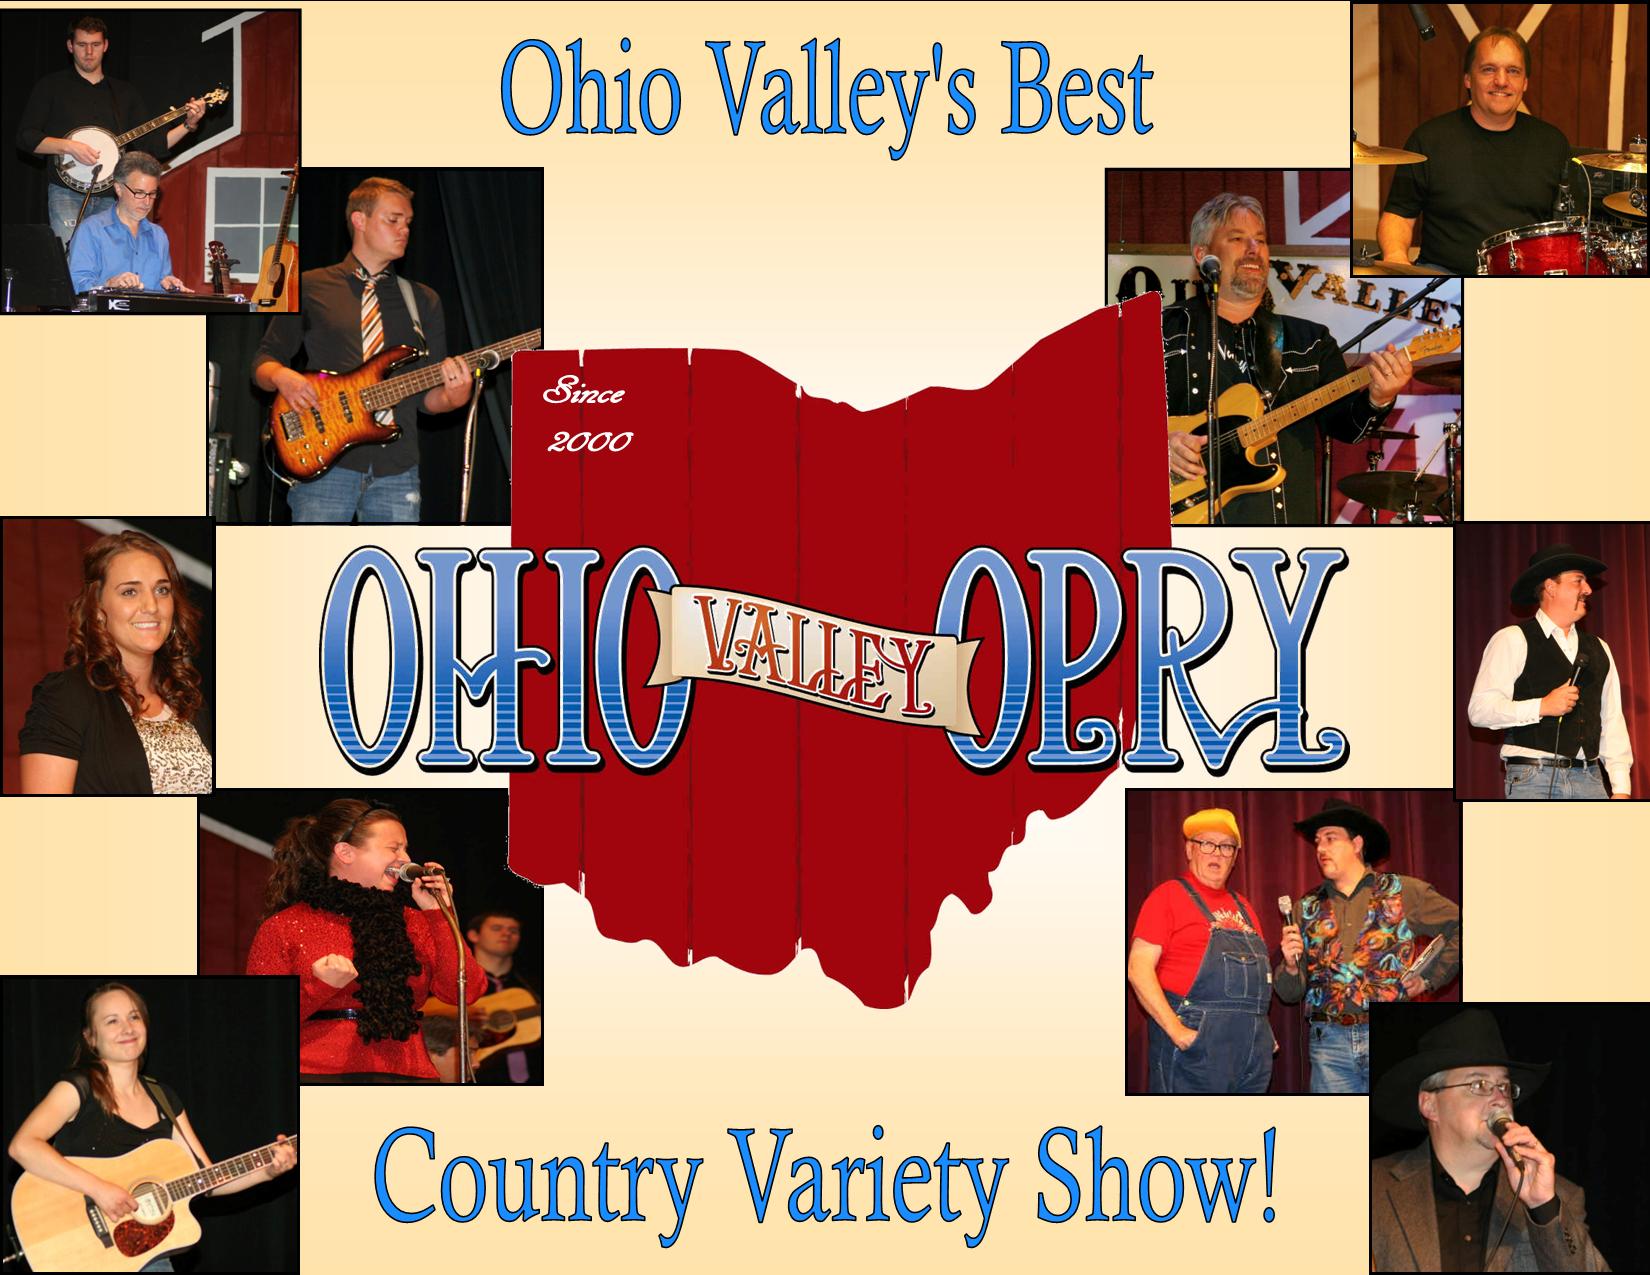 Ohio Valley Opry Peoples Bank Theatre